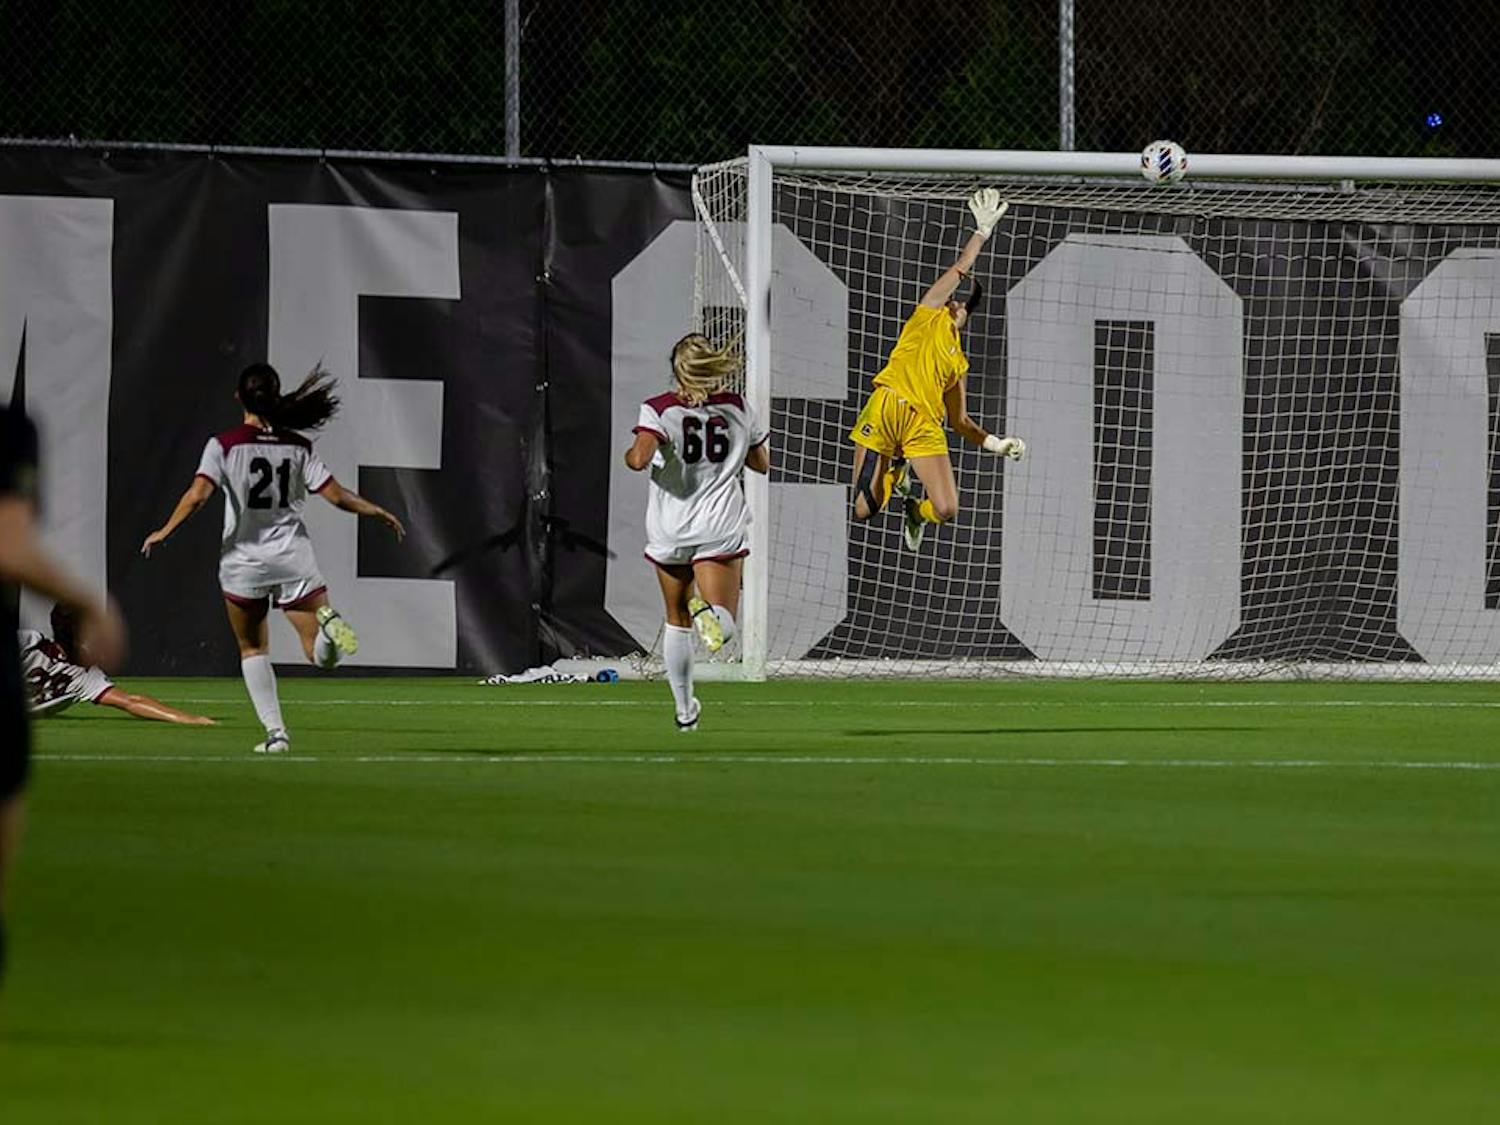 Senior goalkeeper Heather Hinz blocks a a Wake Forest shot on goal. Hinz played all 90 minutes of the game and help South Carolina shutout Wake Forest 2-0 in the NCAA Tournament matchup on Nov. 12, 2022.